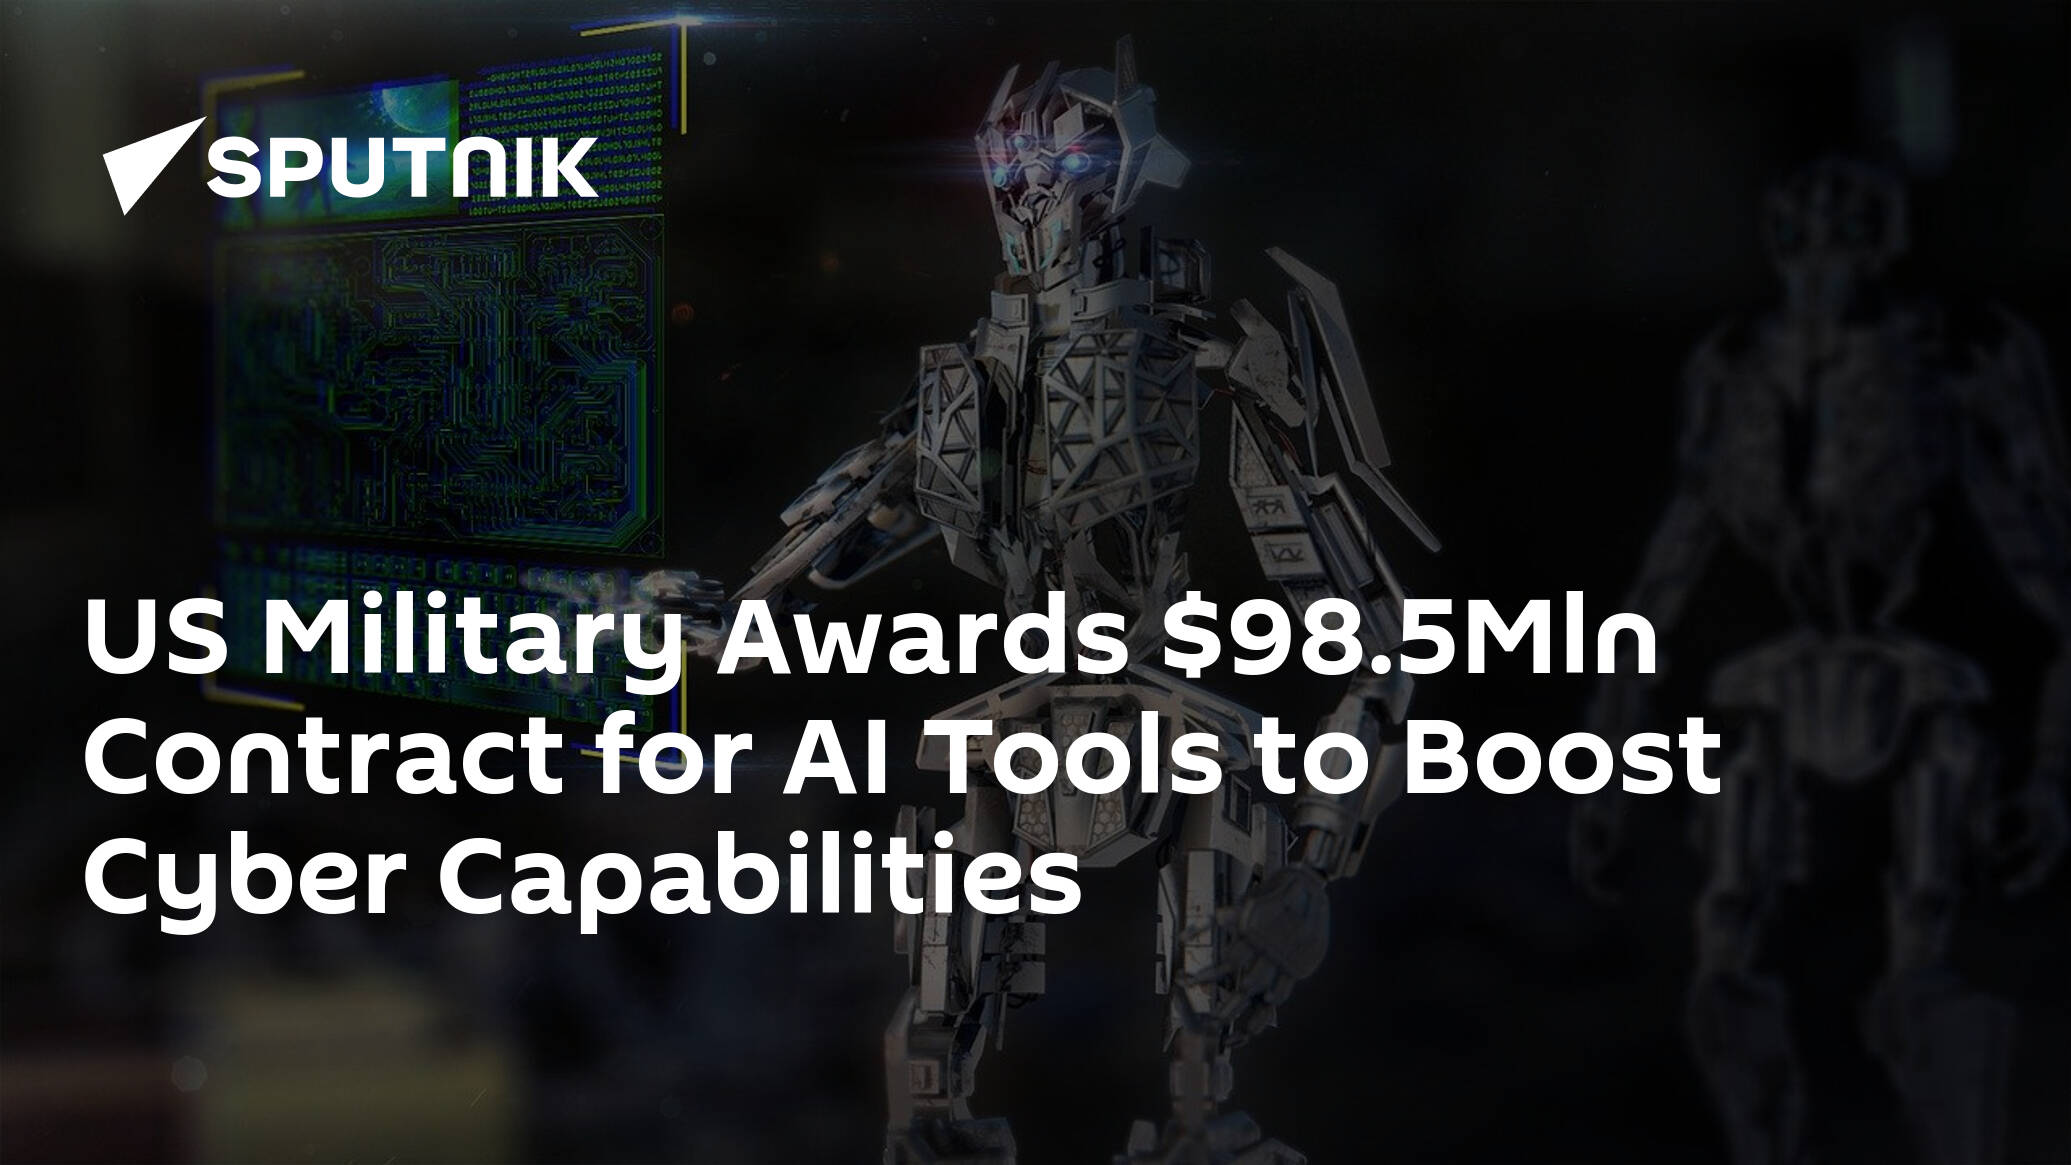 US Military Awards .5Mln Contract for AI Tools to Boost Cyber Capabilities